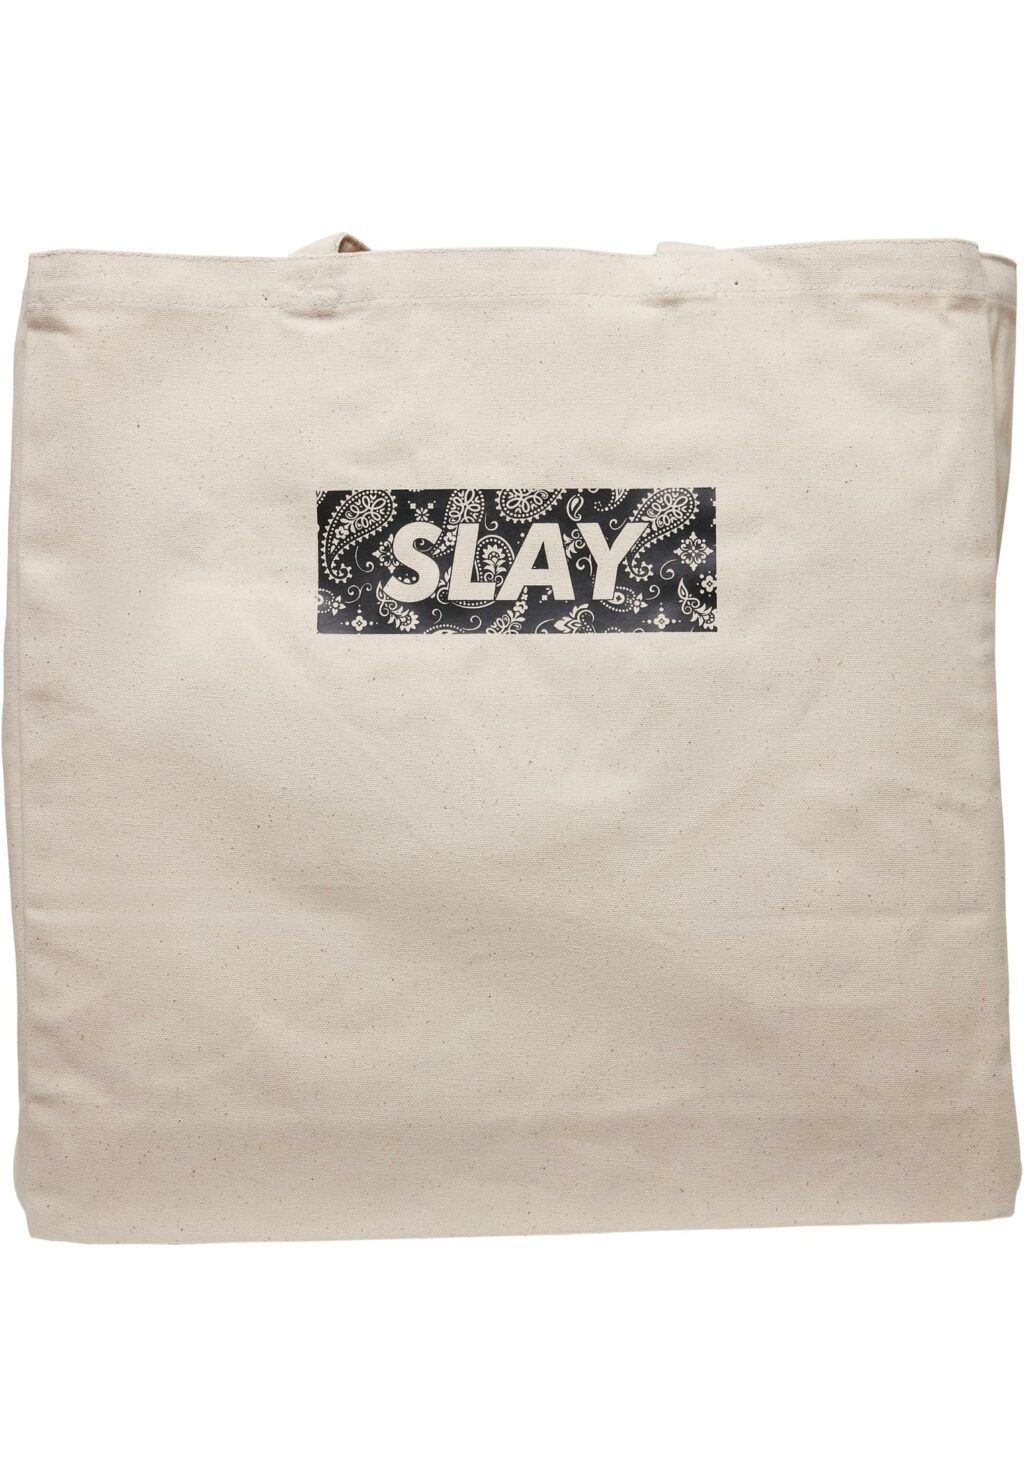 SLAY Oversize Canvas Tote Bag offwhite one MT2282